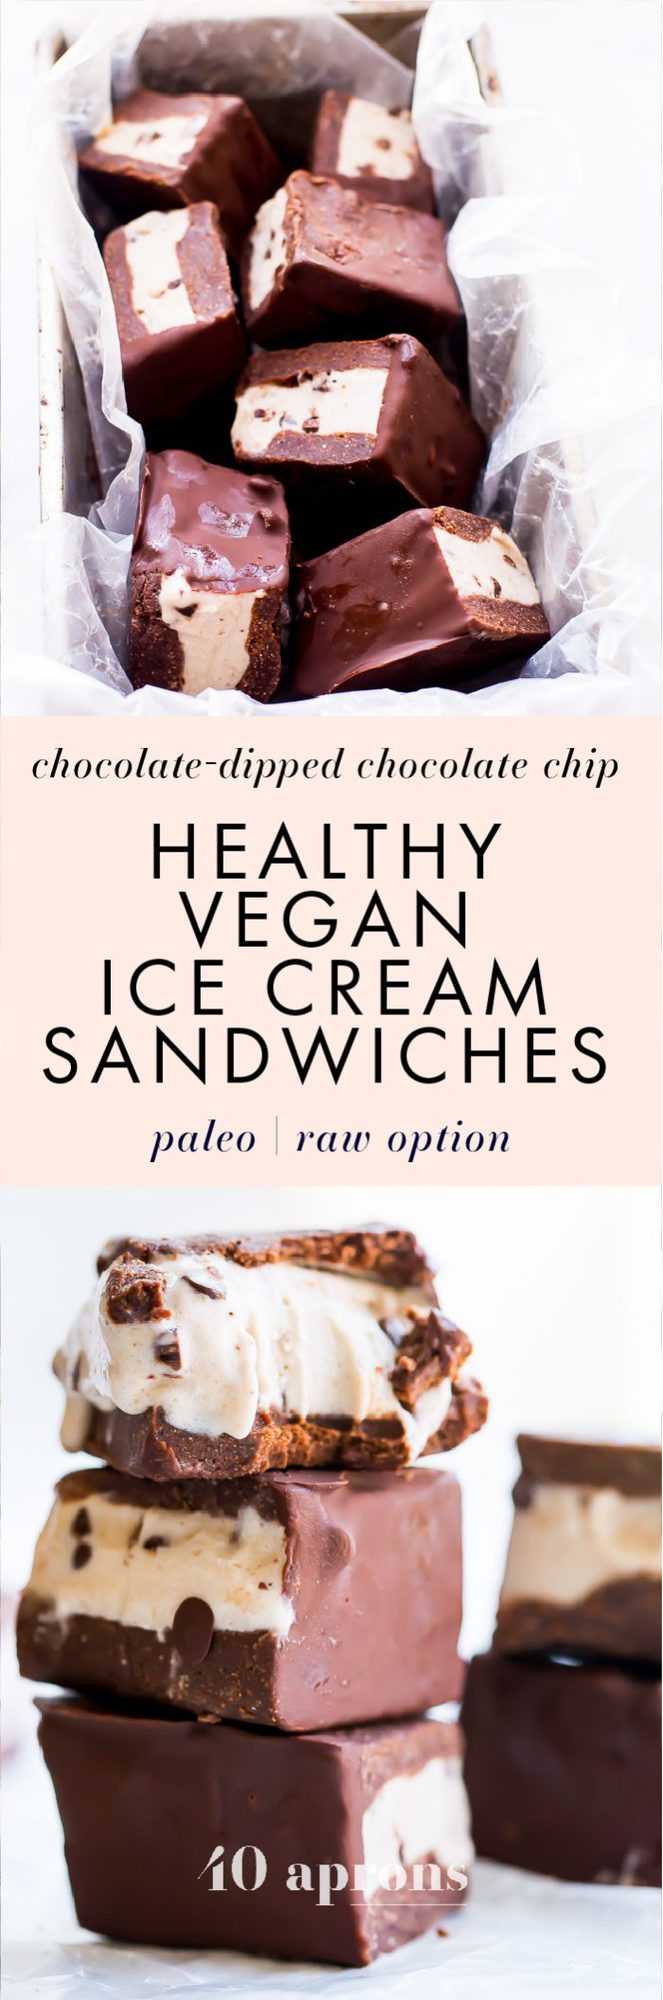 These healthy vegan ice cream sandwiches are out of control! Chocolate chip "nice cream" sandwiched between two raw chocolate cookies, dipped in chocolate? These healthy vegan ice cream sandwiches are basically about to be your breakfast, lunch, and dinner... If you're looking for healthy paleo ice cream sandwiches, you've come to the right place, my friend!